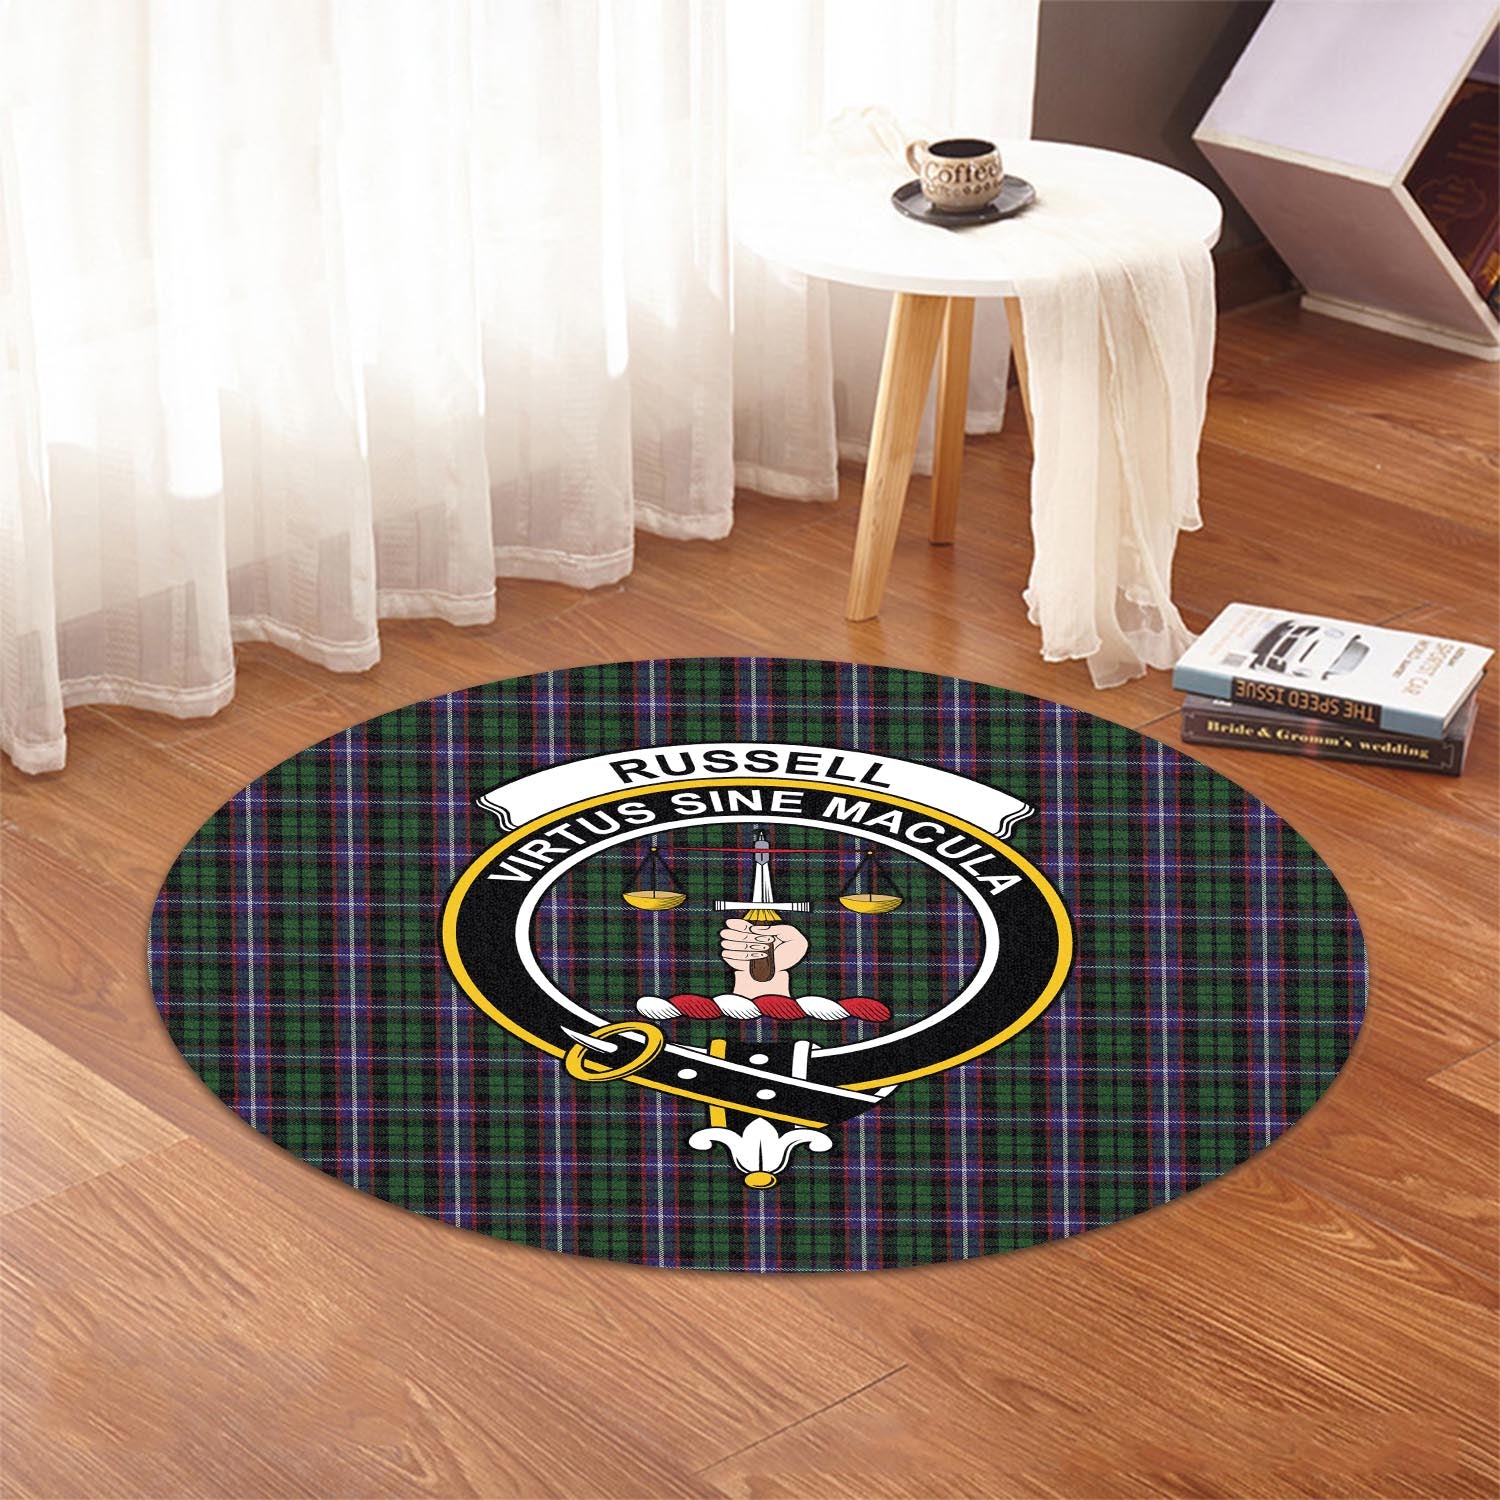 russell-tartan-round-rug-with-family-crest